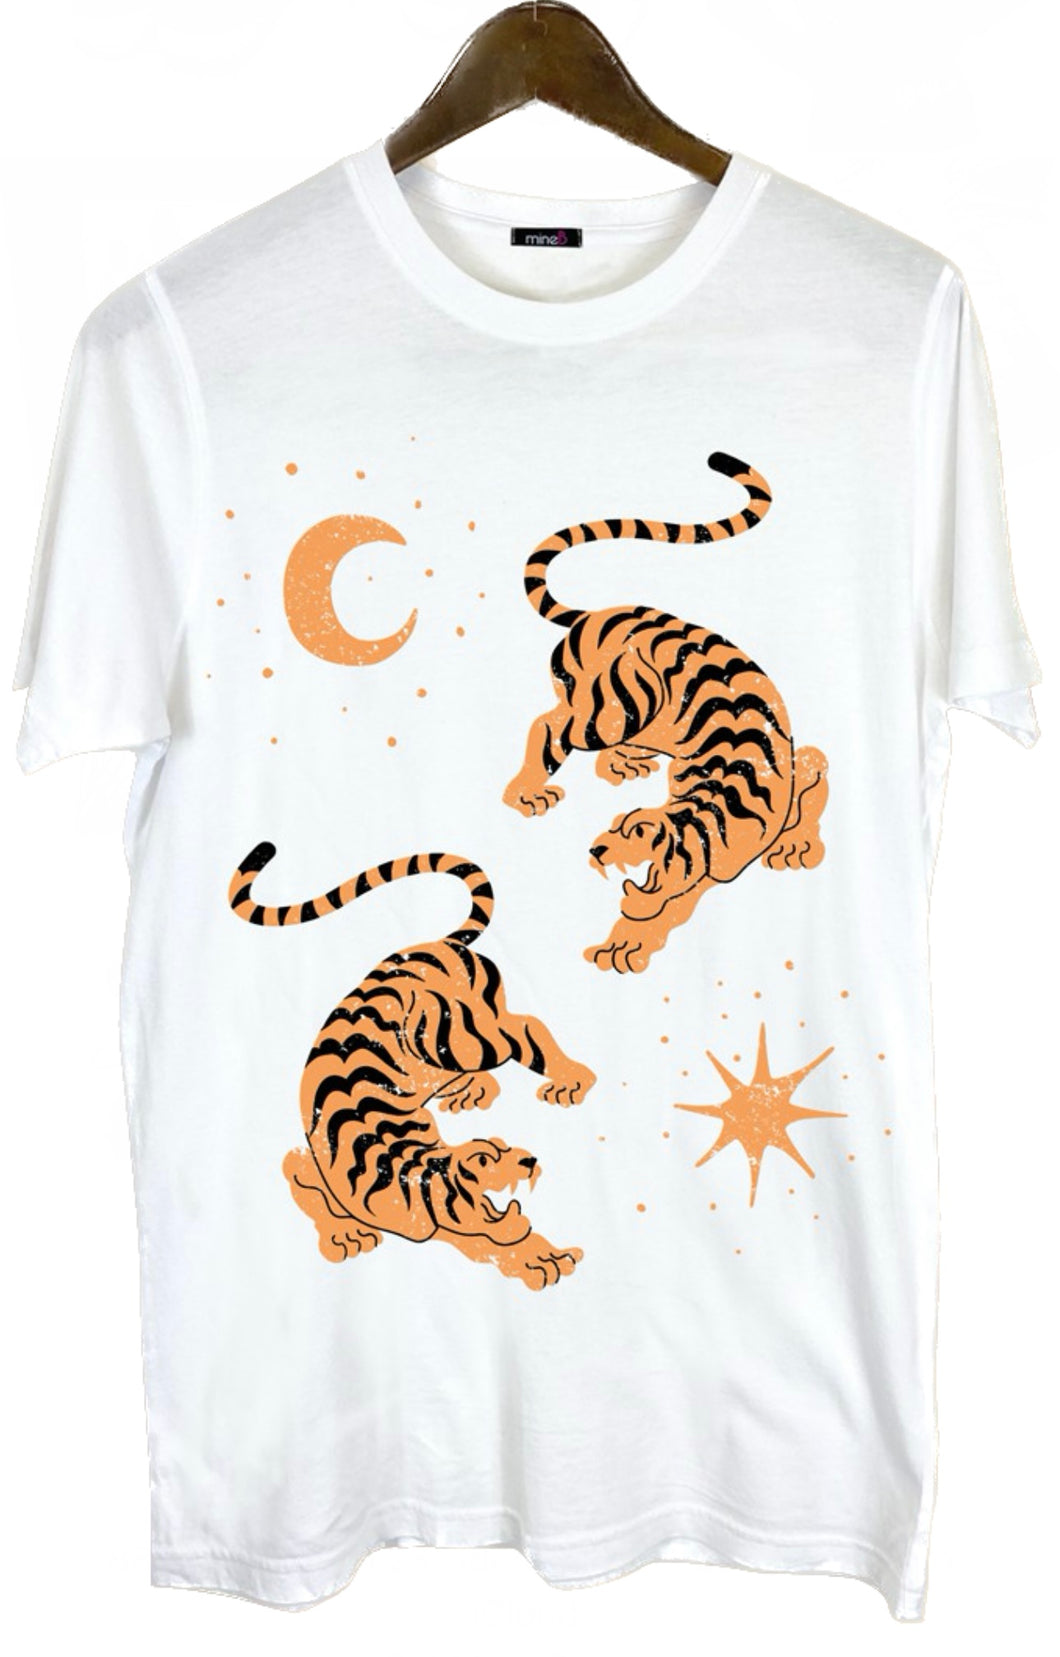 The Tiger The Sun The Moon Graphic Tee